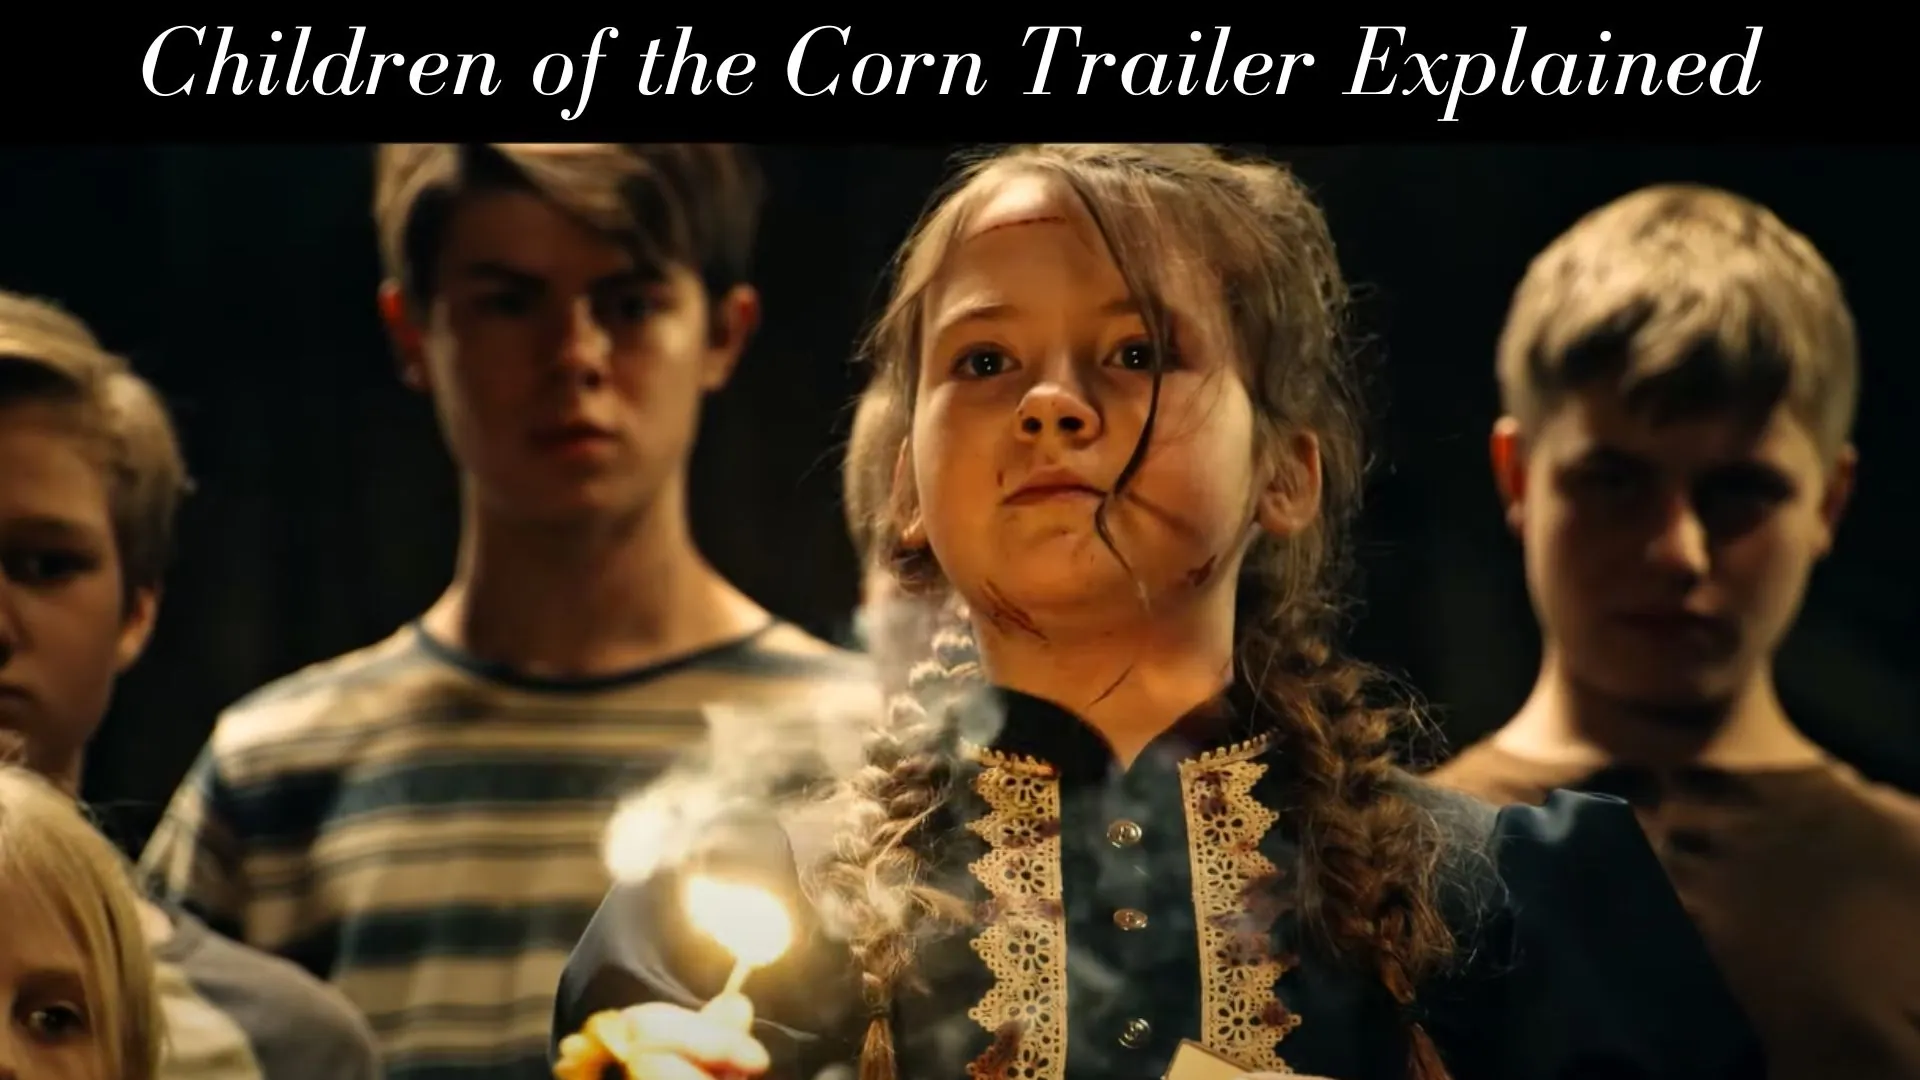 Children of the Corn Trailer Explained (Image credit: Youtube)